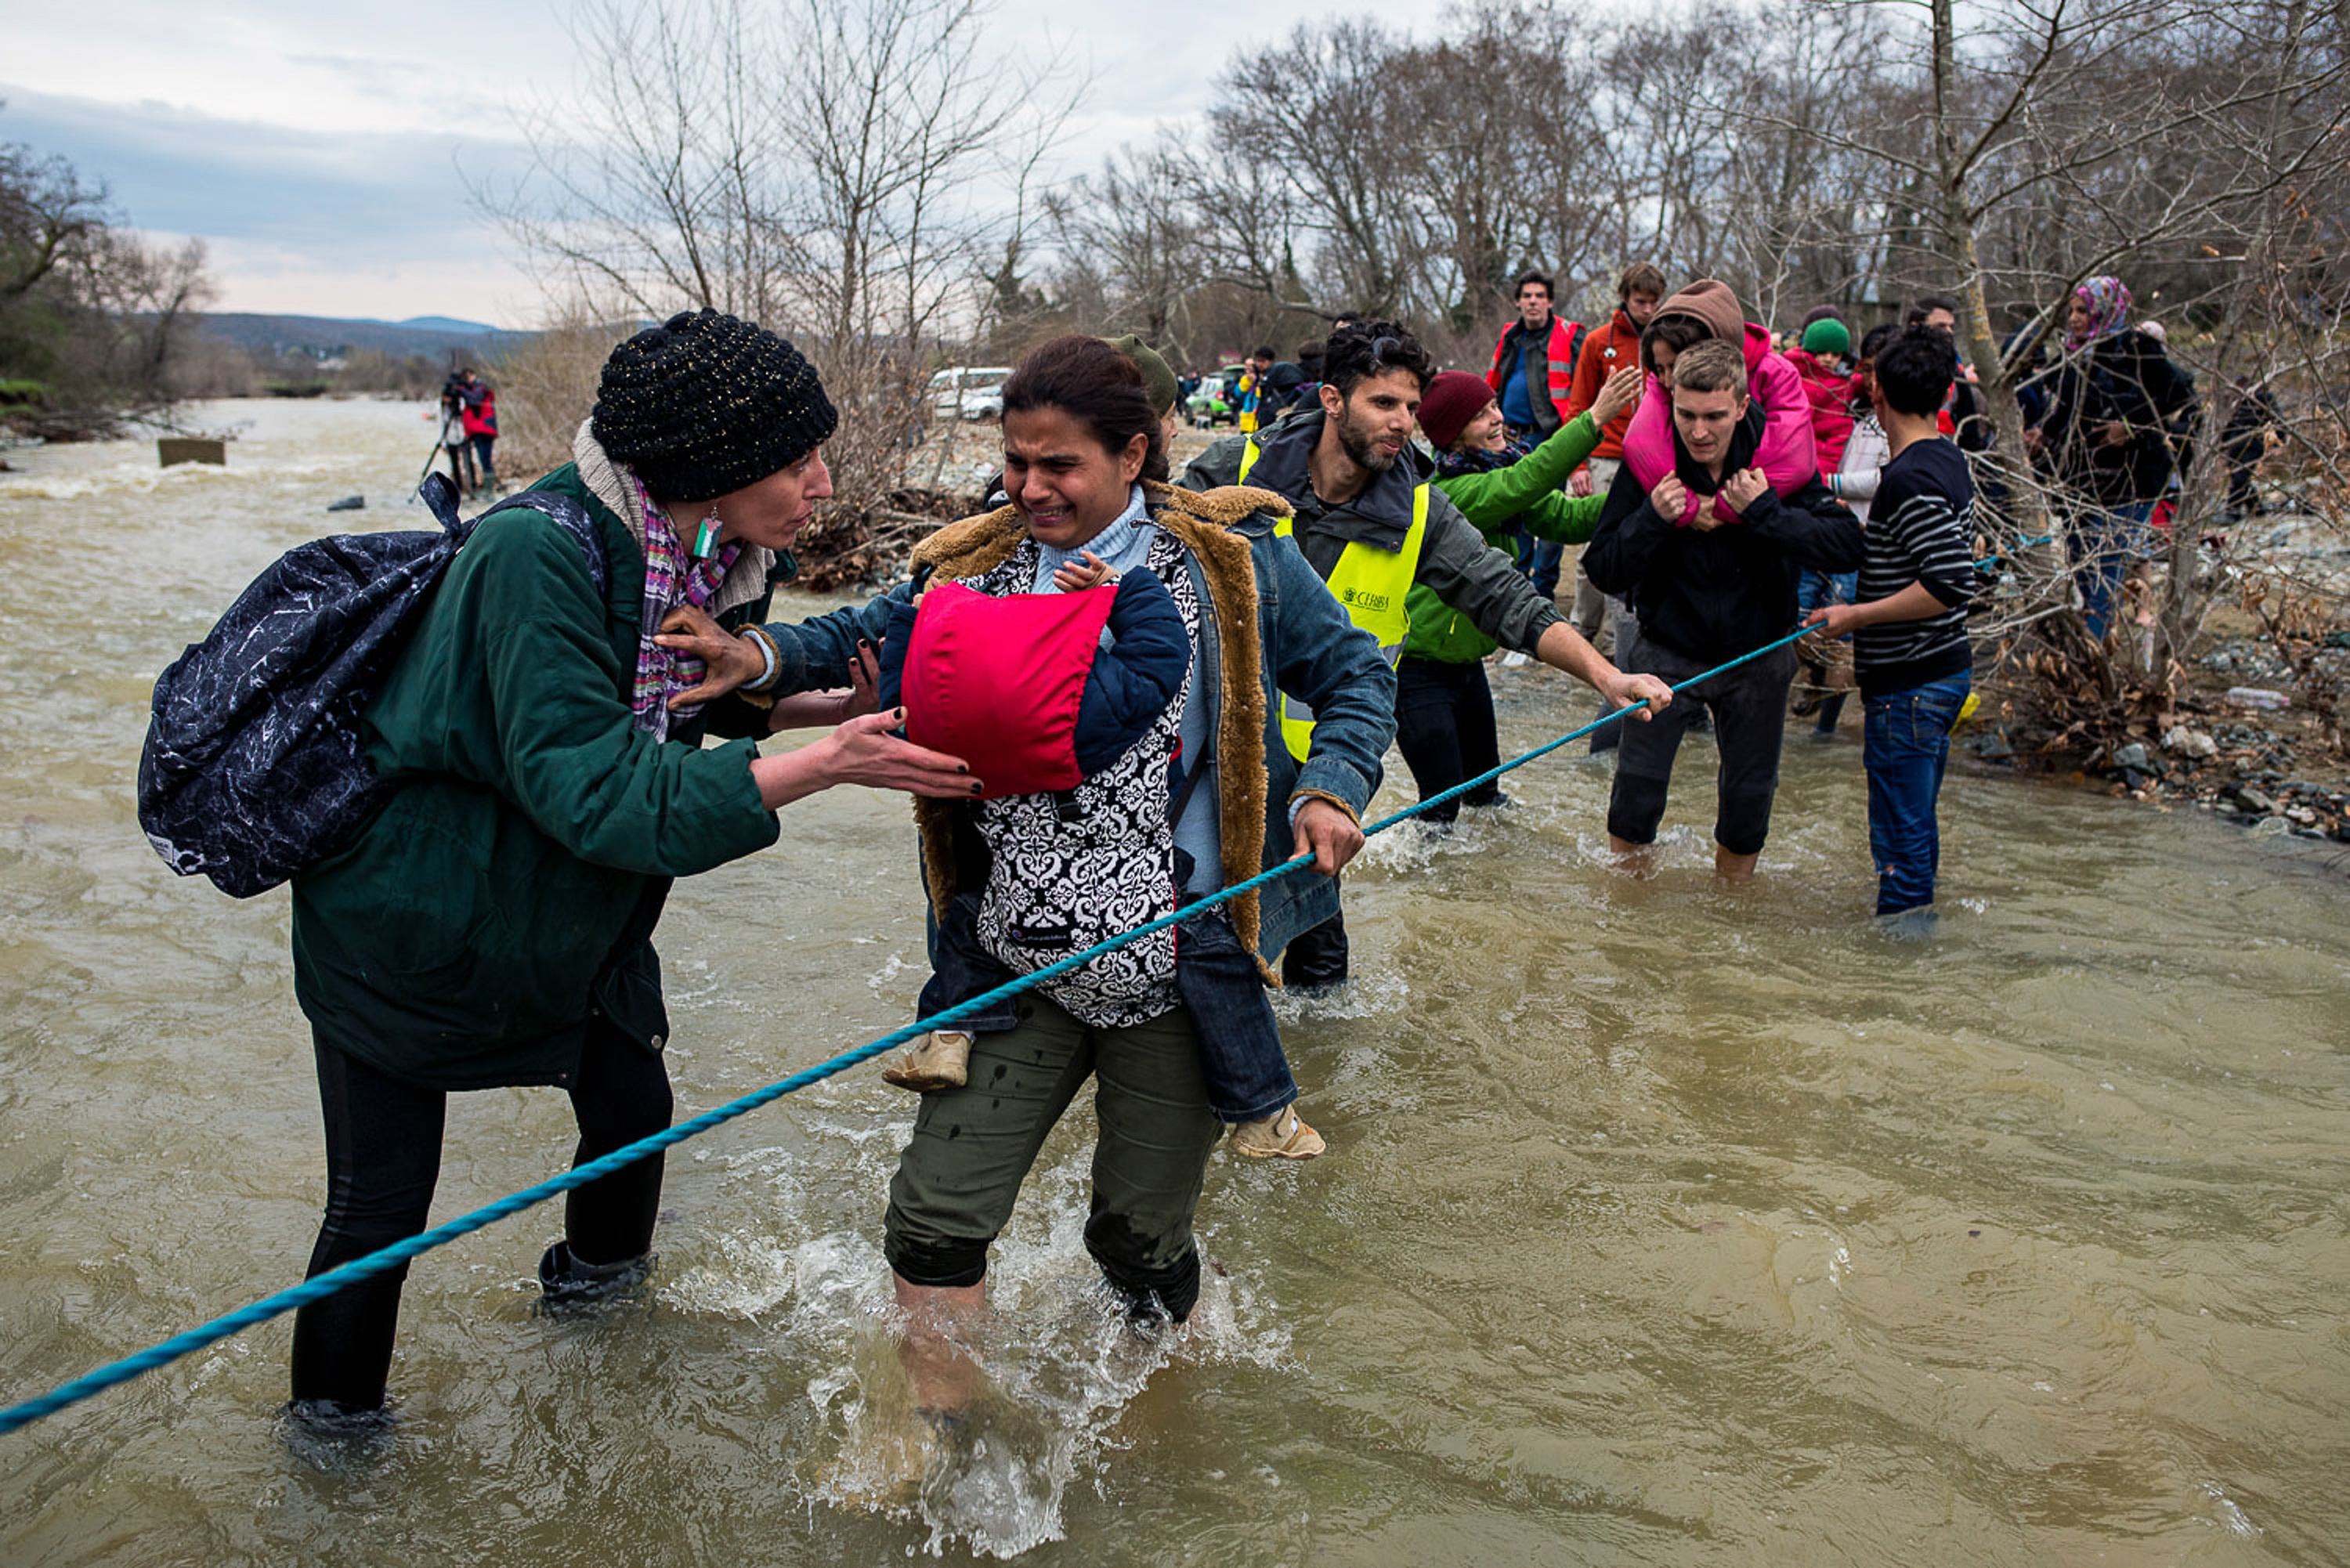 Volunteers help refugees to cross the river. As border is closed, refugees cross the river trying to find alternative way to enter Macedonia. Greece, 14.03.2016.